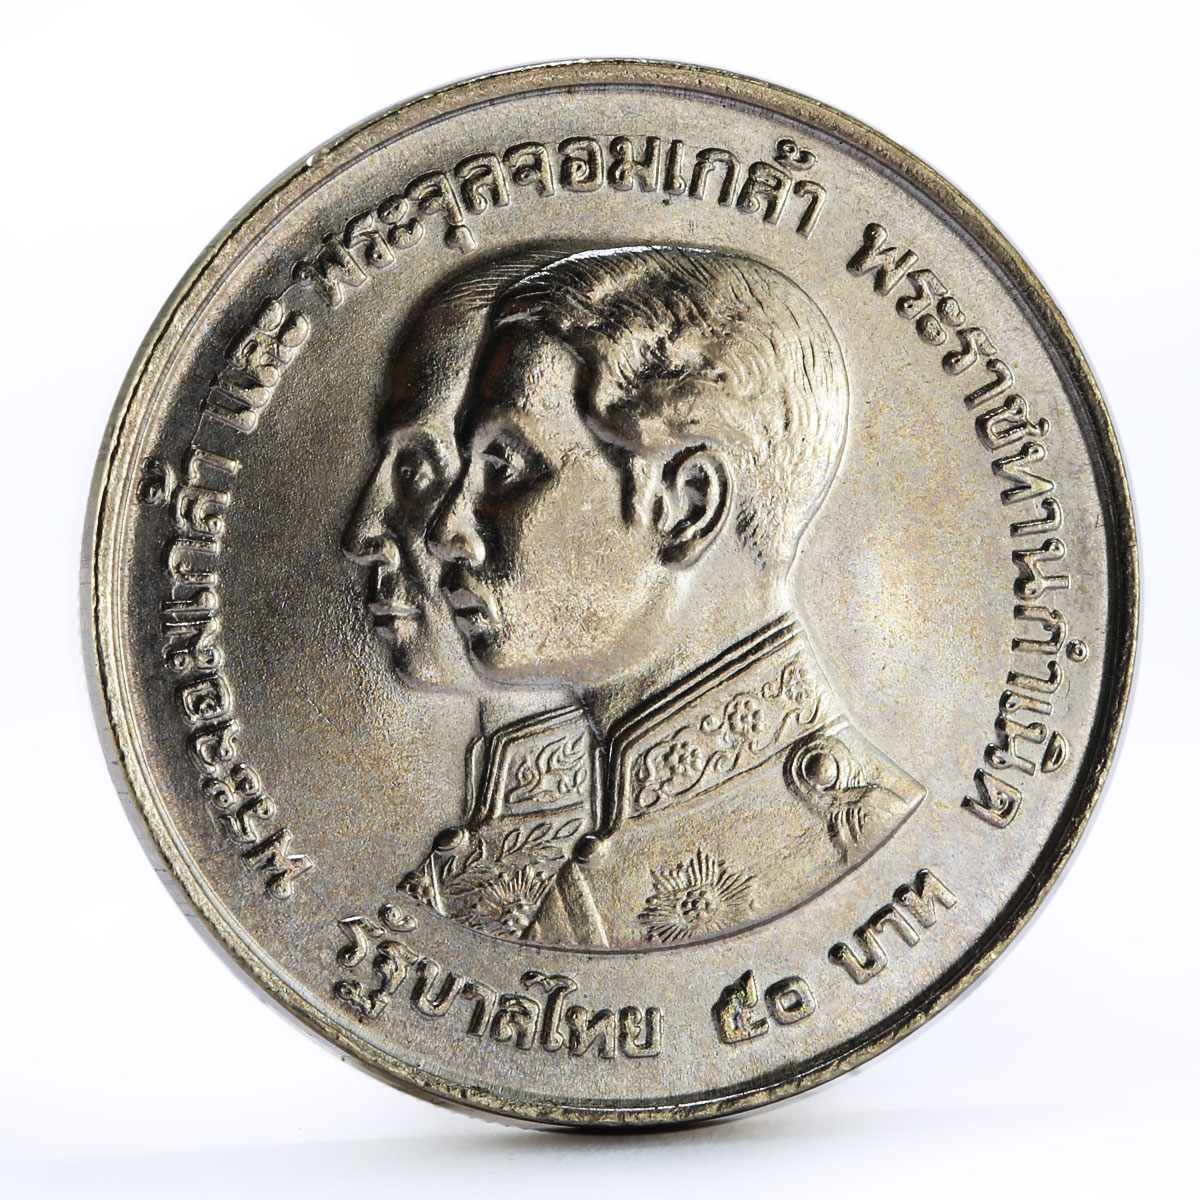 Thailand 50 baht 100th Anniversary of the National Museum silver coin 1974